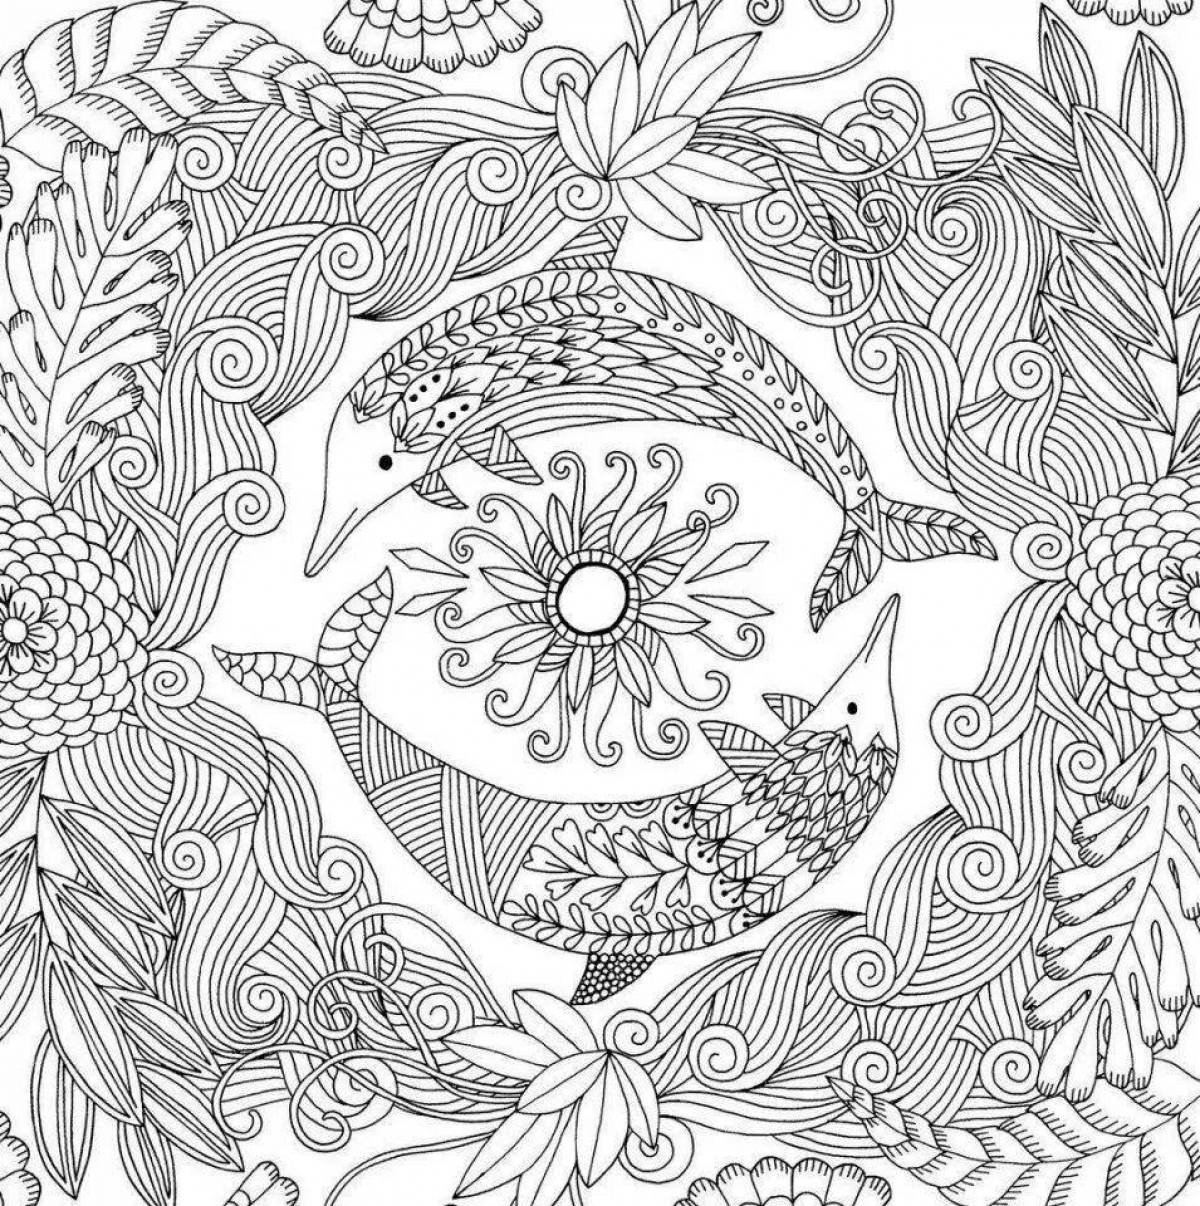 Harmonious coloring for stress relief